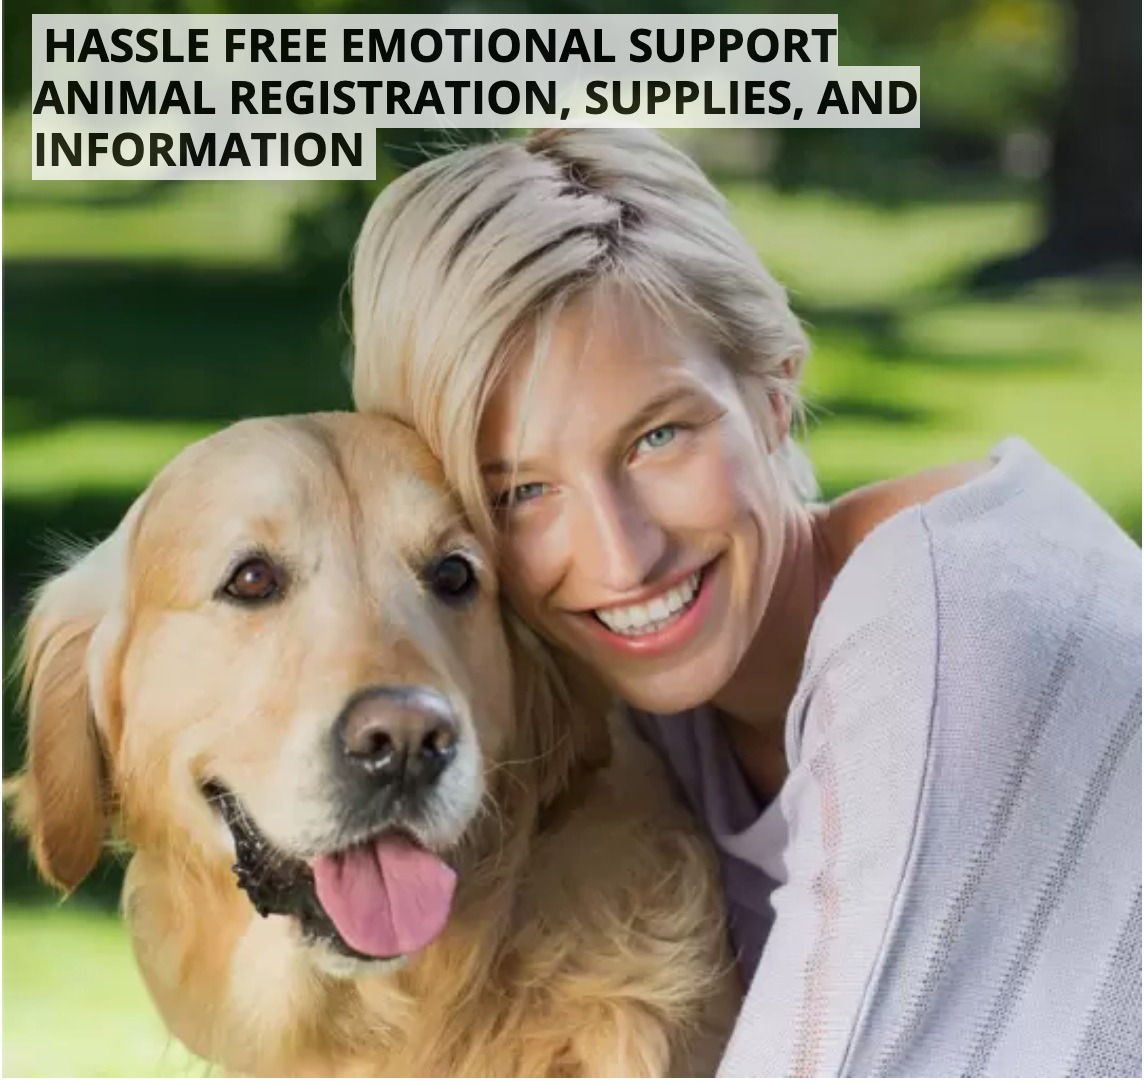 How to Get an Emotional Support Animal in the USA